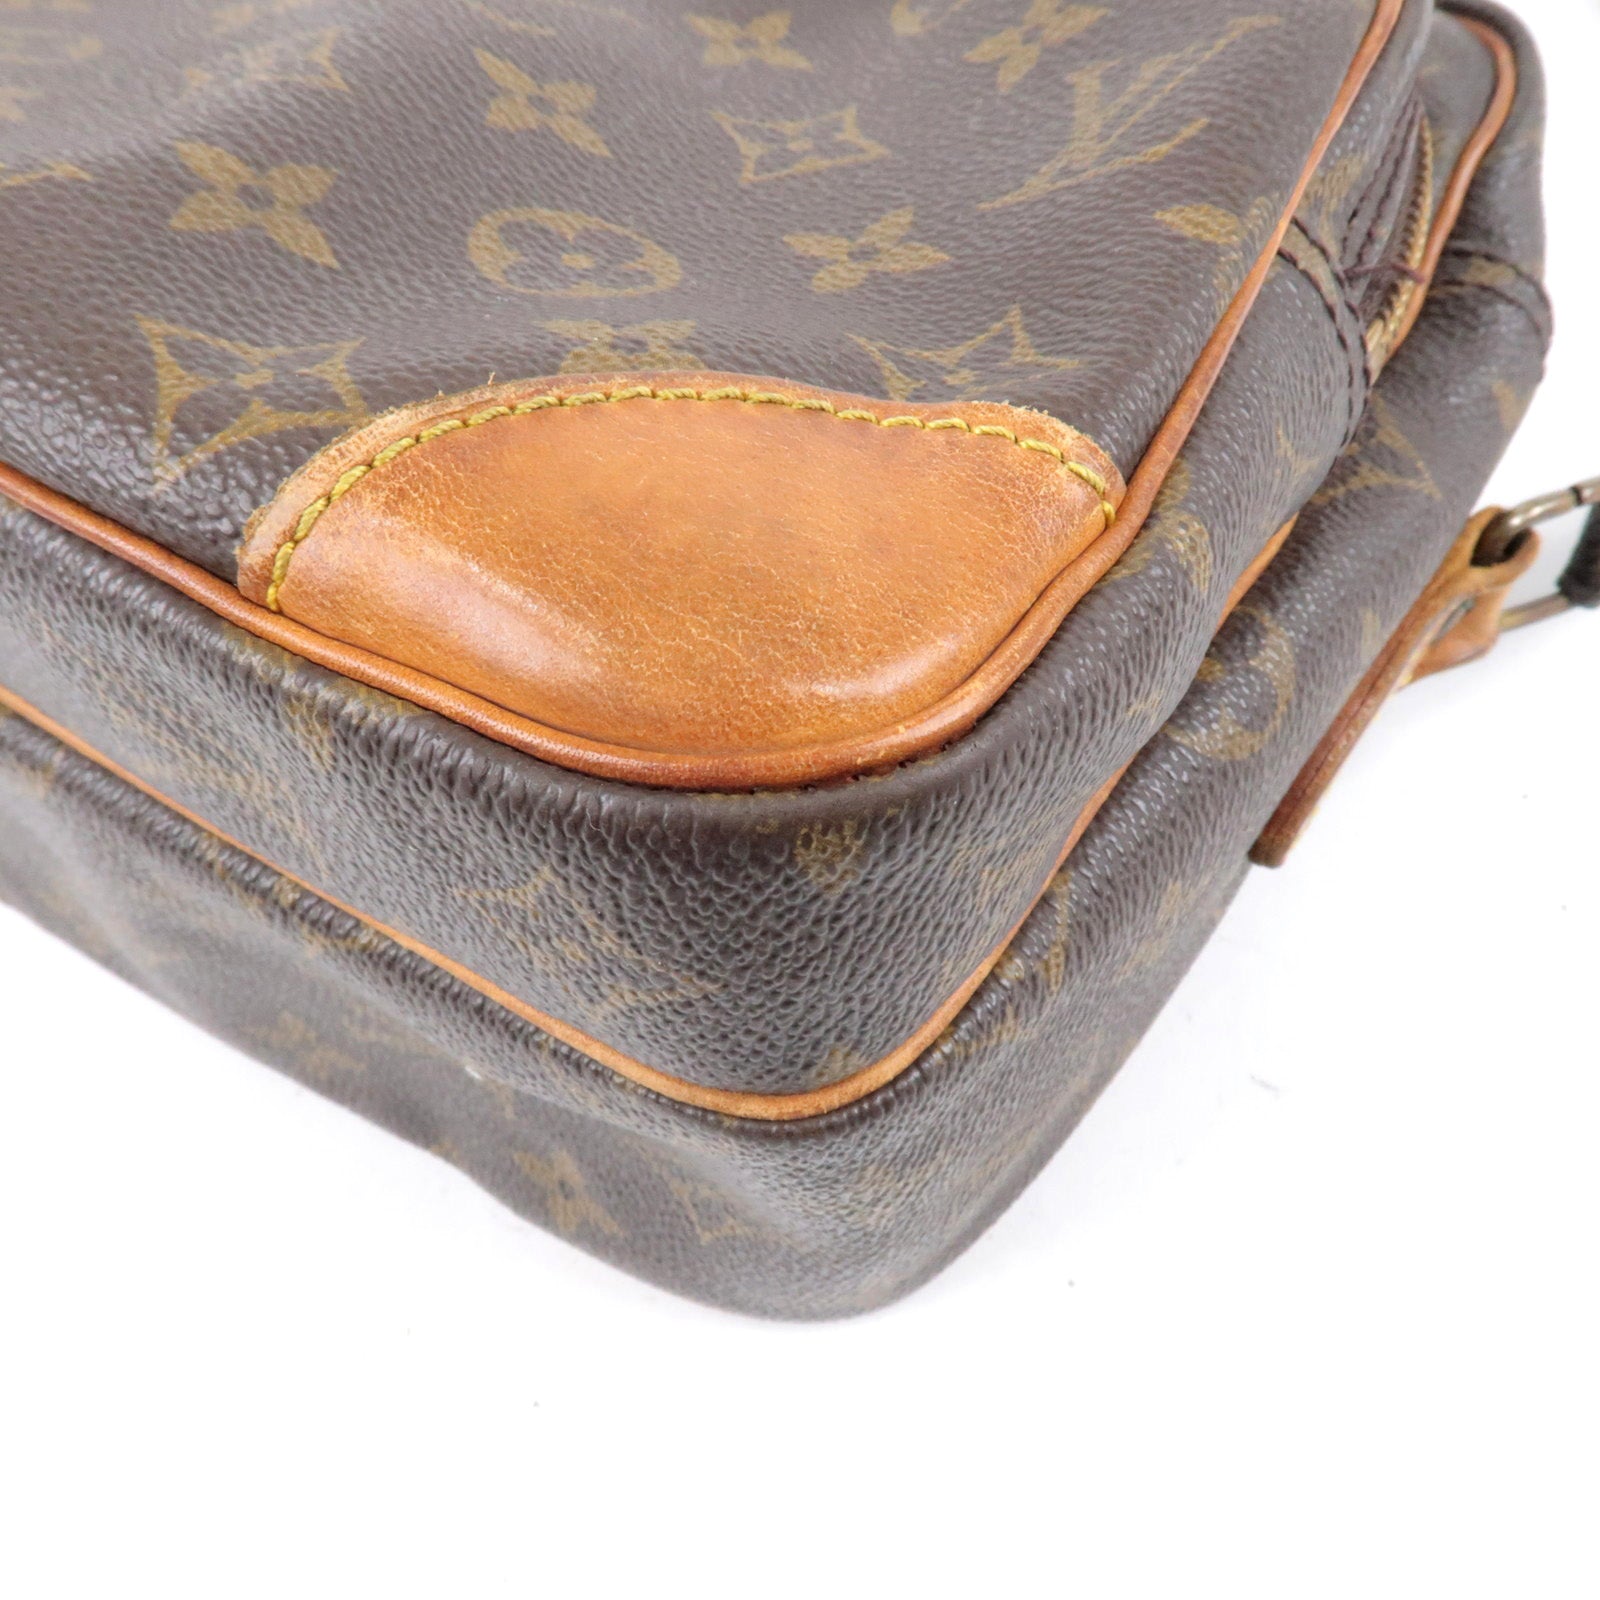 Louis Vuitton Nile Bag Monogram Canvas and Brown Leather -  Finland